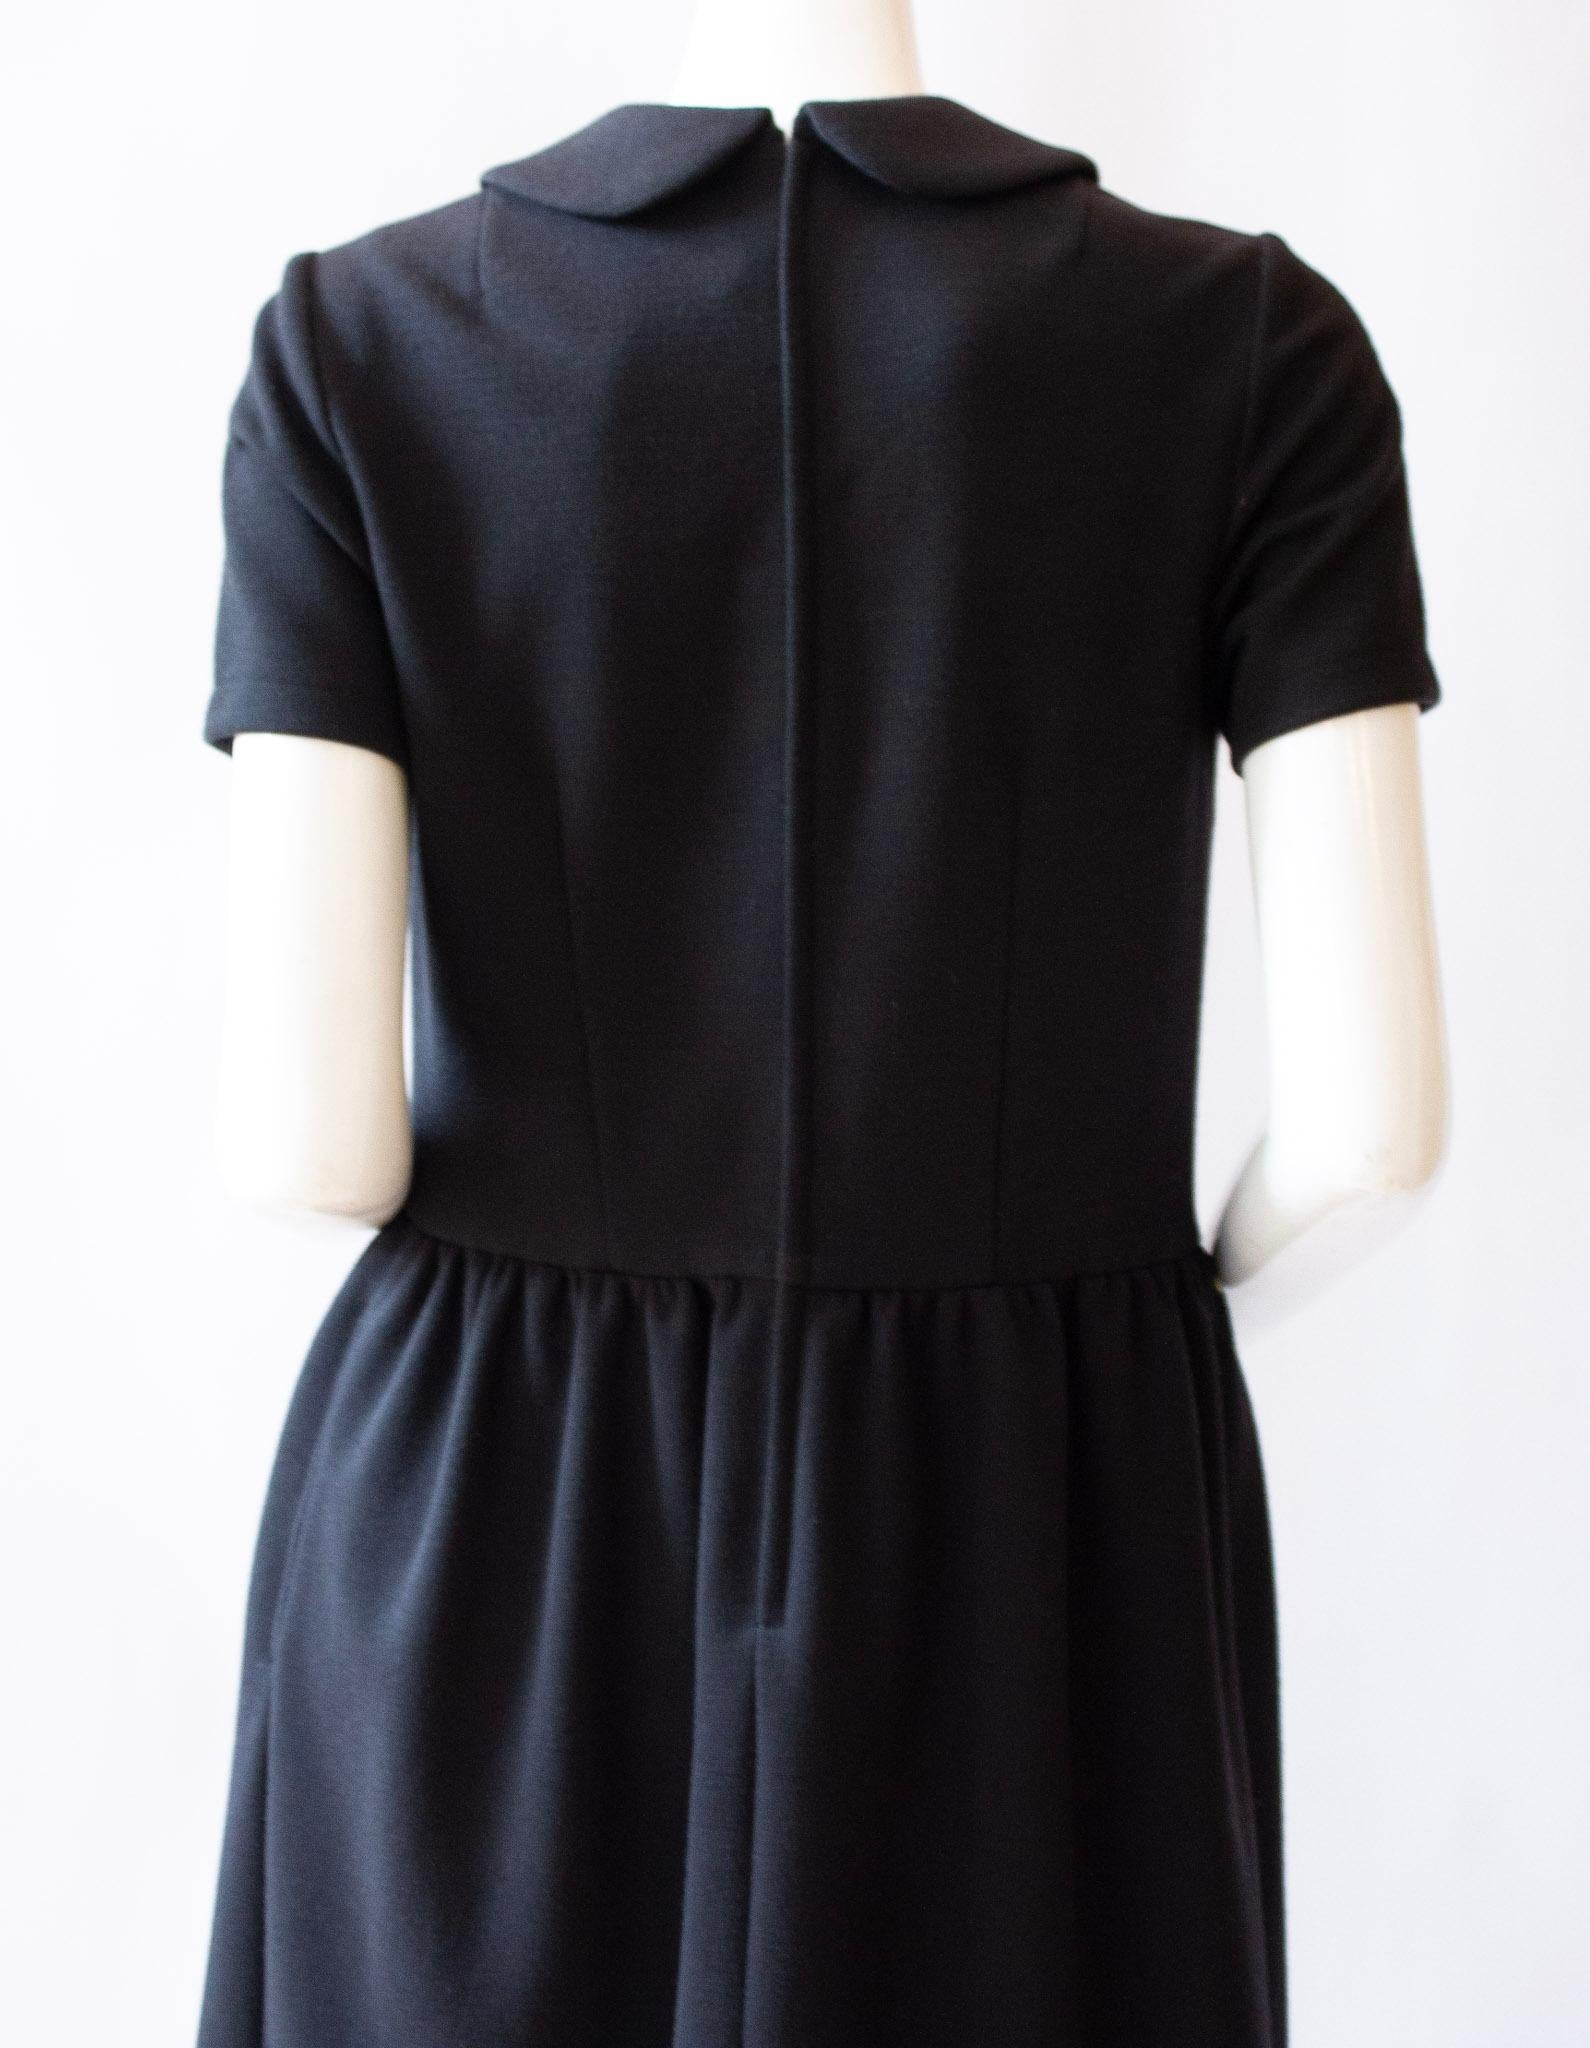 Comme des Garçons black dress In Excellent Condition For Sale In Kingston, NY